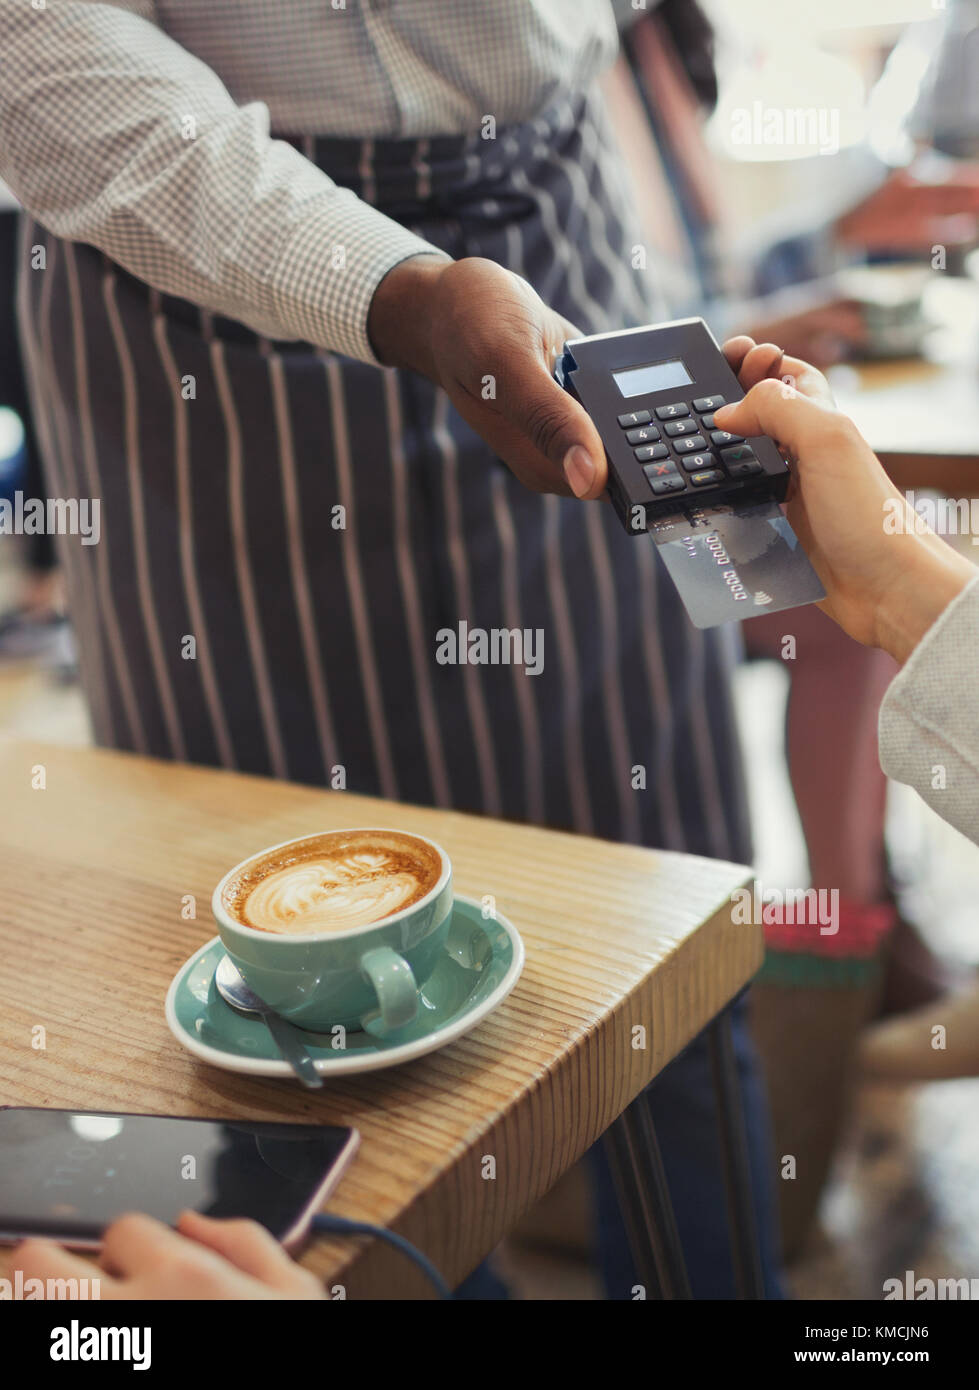 Customer paying waiter with credit card reader at cafe table Stock Photo